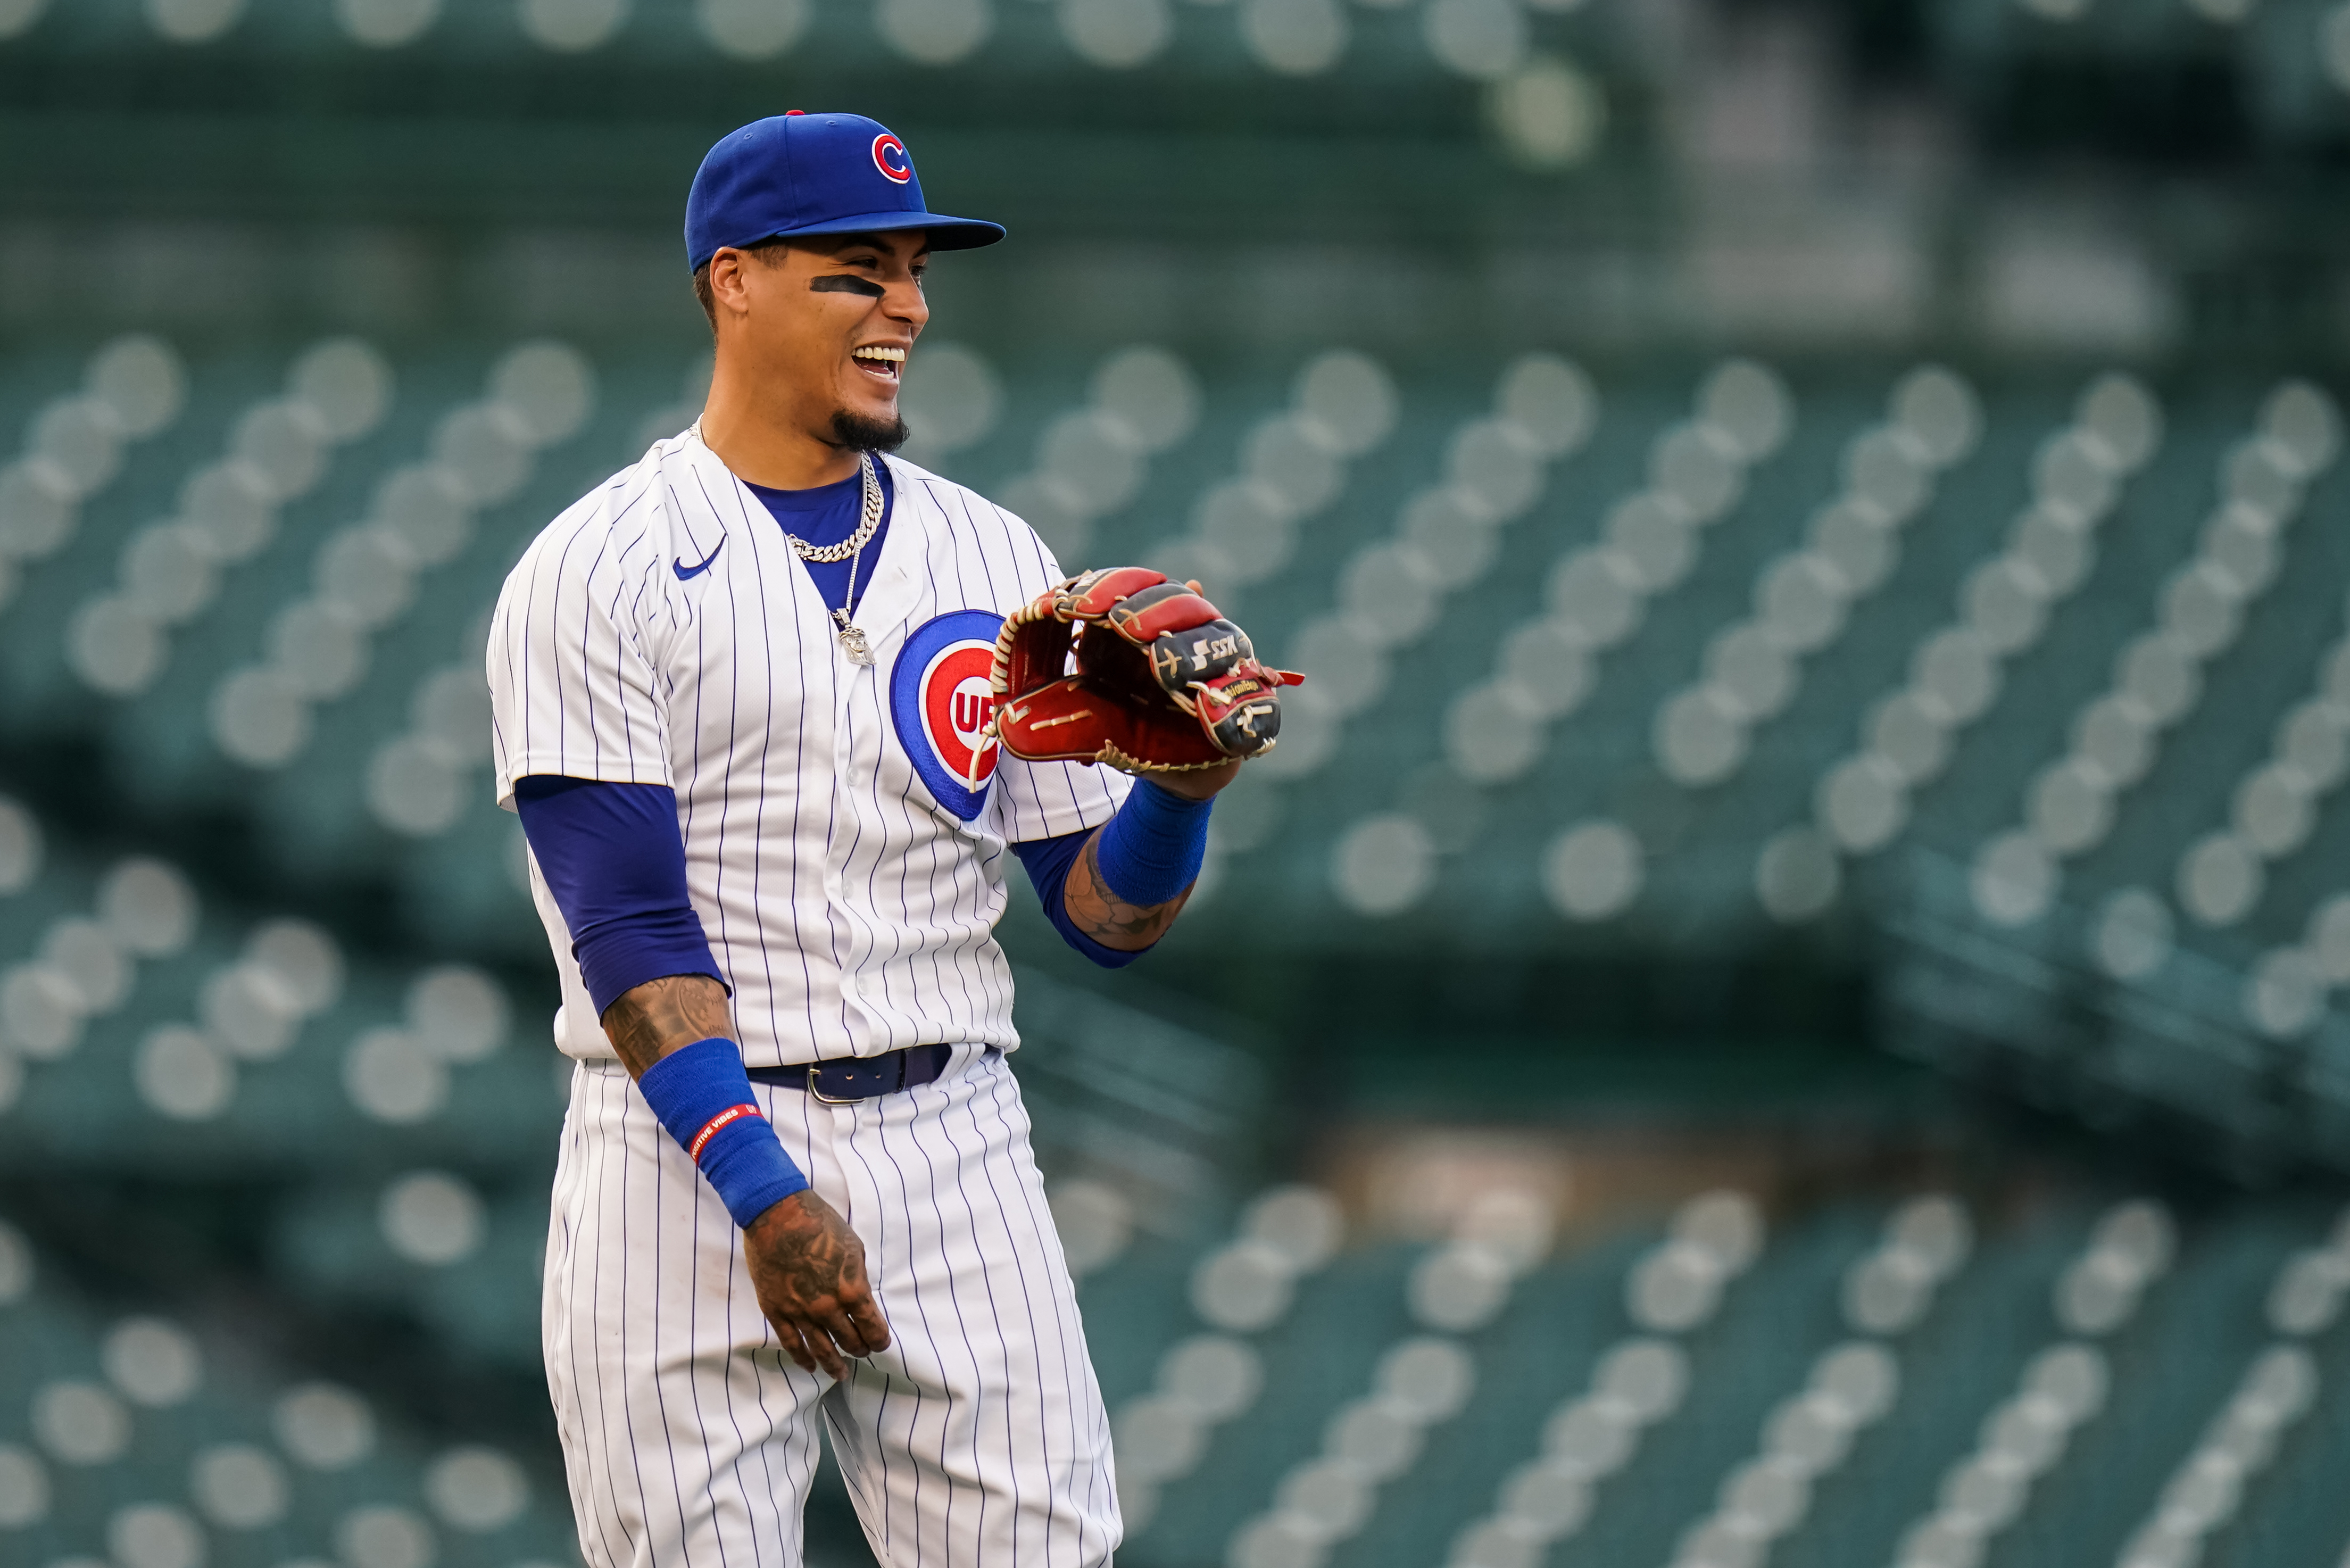 Cubs SS Javy Baez tosses bat past mound on strikeout, sails throw